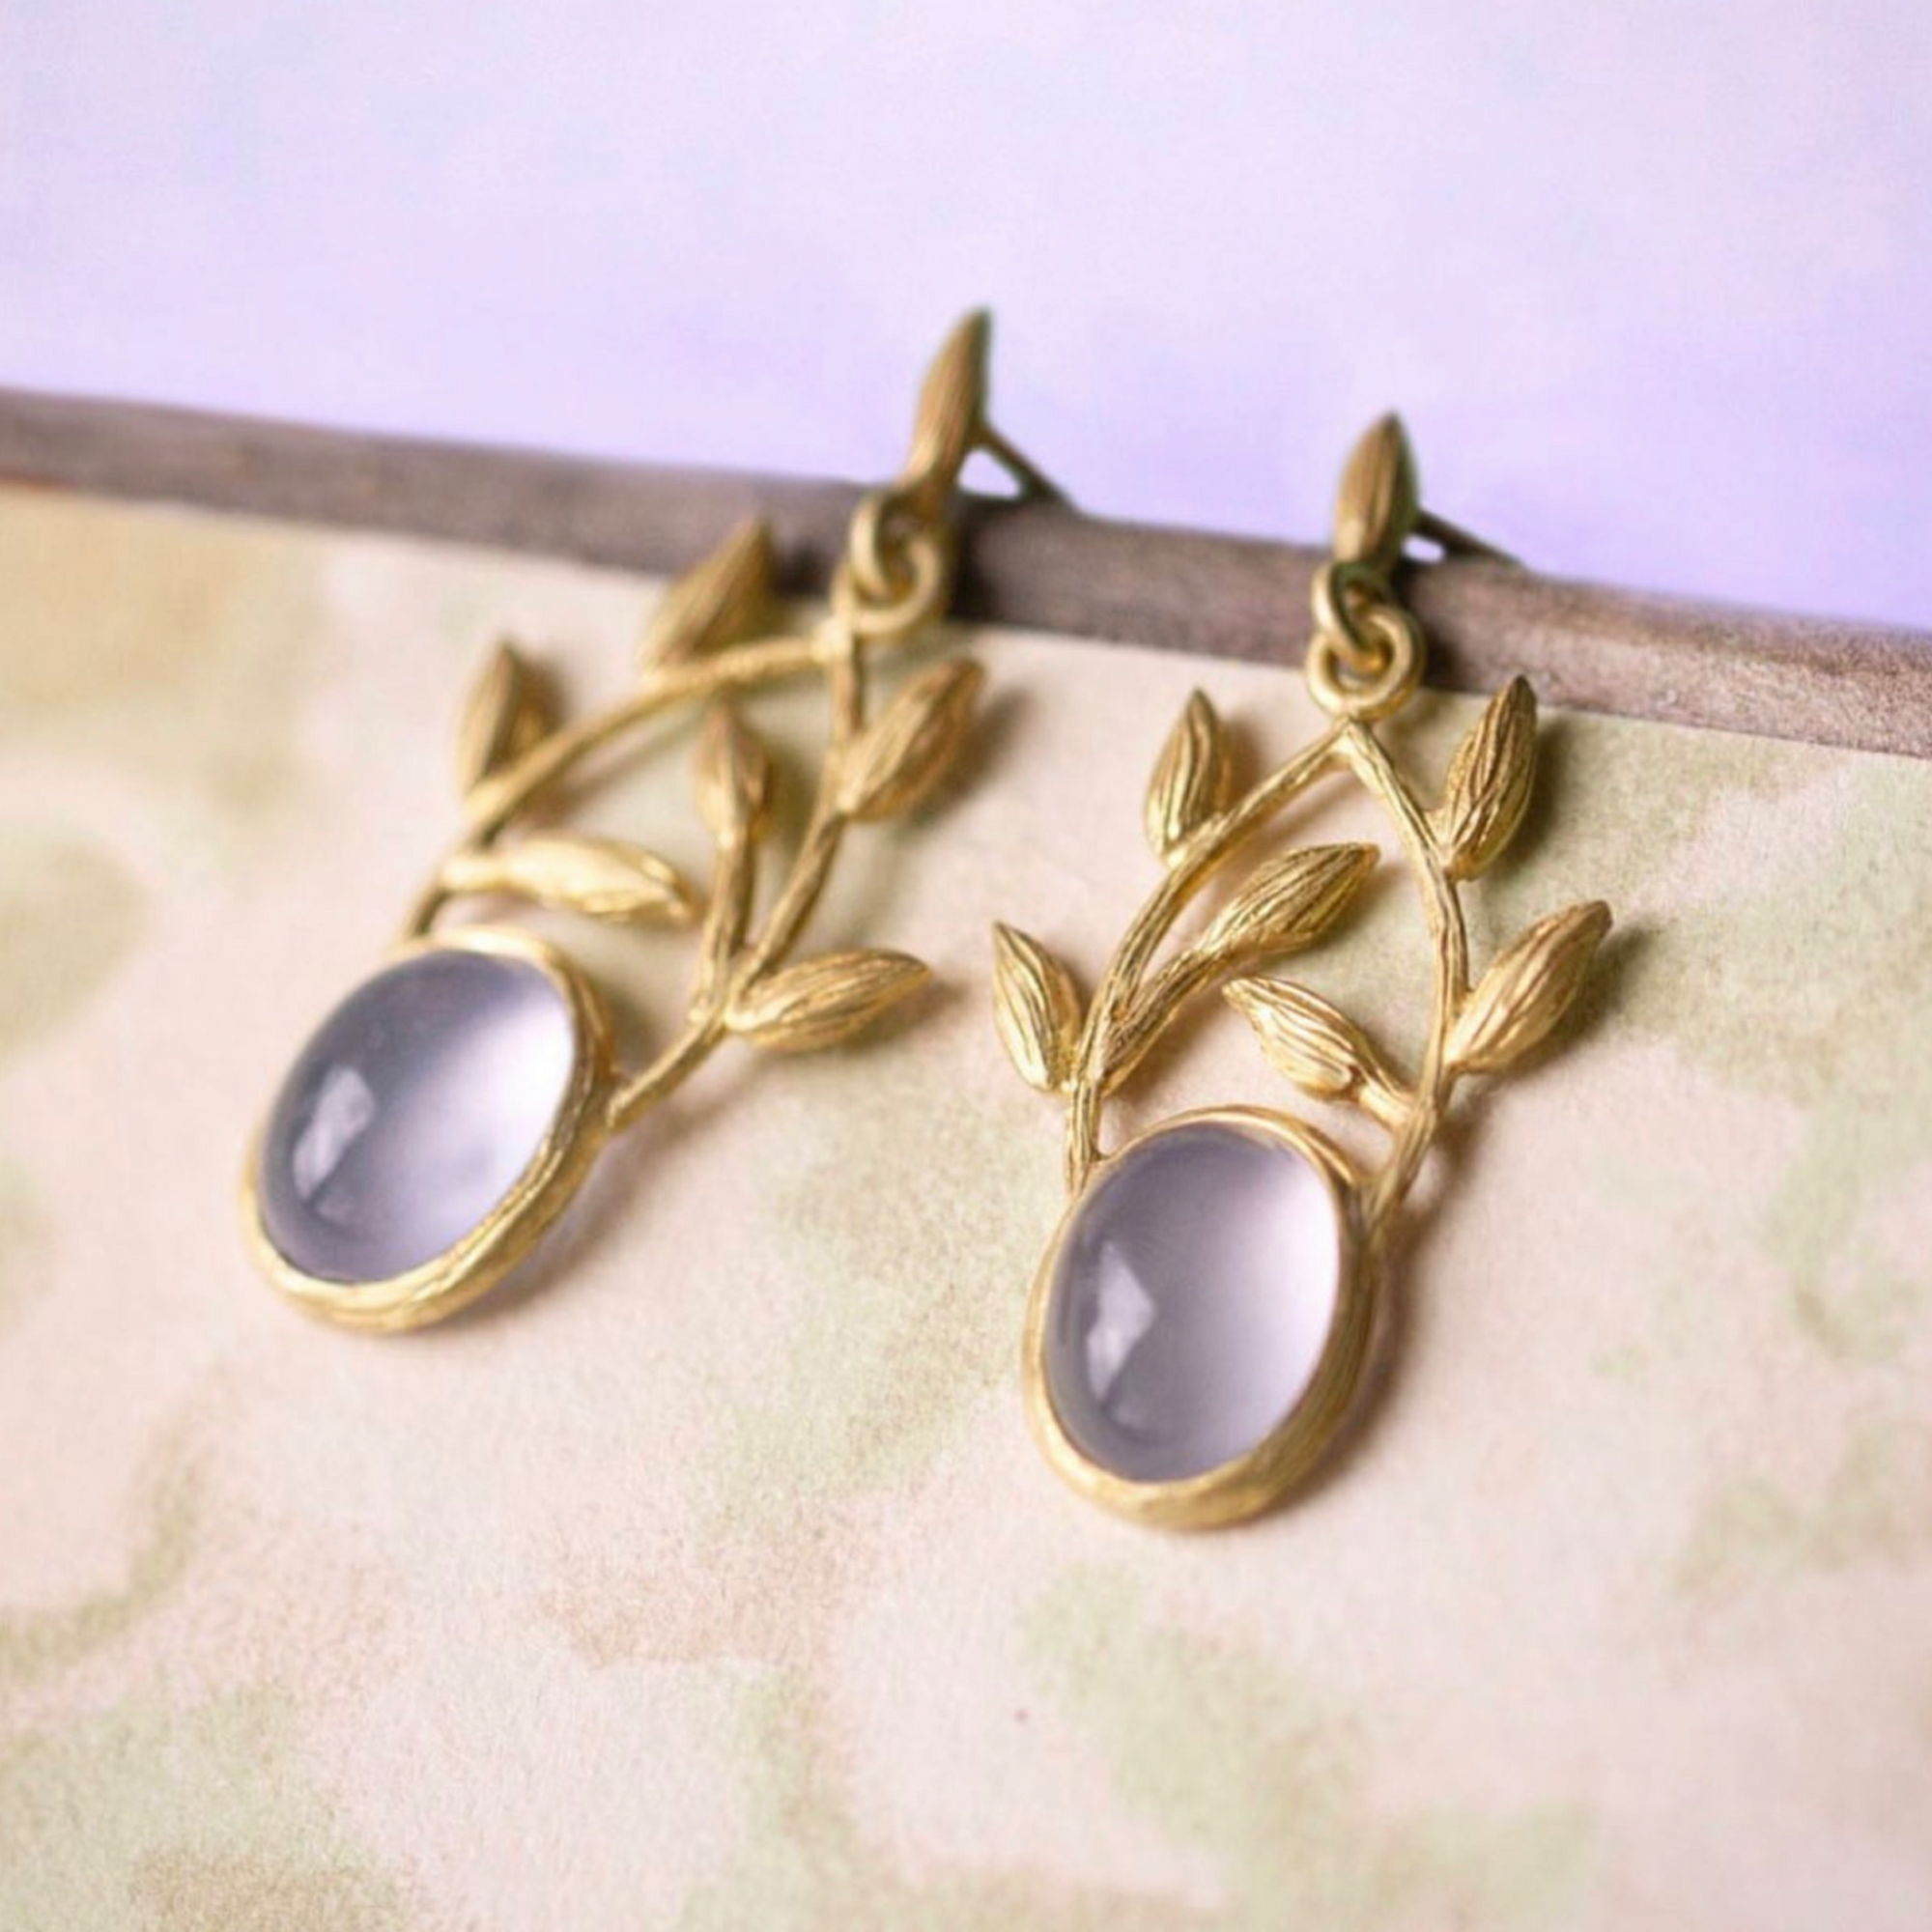  Chalcedony Leaf Crown Earrings by Laurie Kaiser available at Talisman Collection Fine Jewelers in El Dorado Hills, CA and online. The earrings feature lavender chalcedony cabochon ovals that dangle gracefully from 18k yellow gold vines. These lovey earrings secure with a comfortable post back closure.